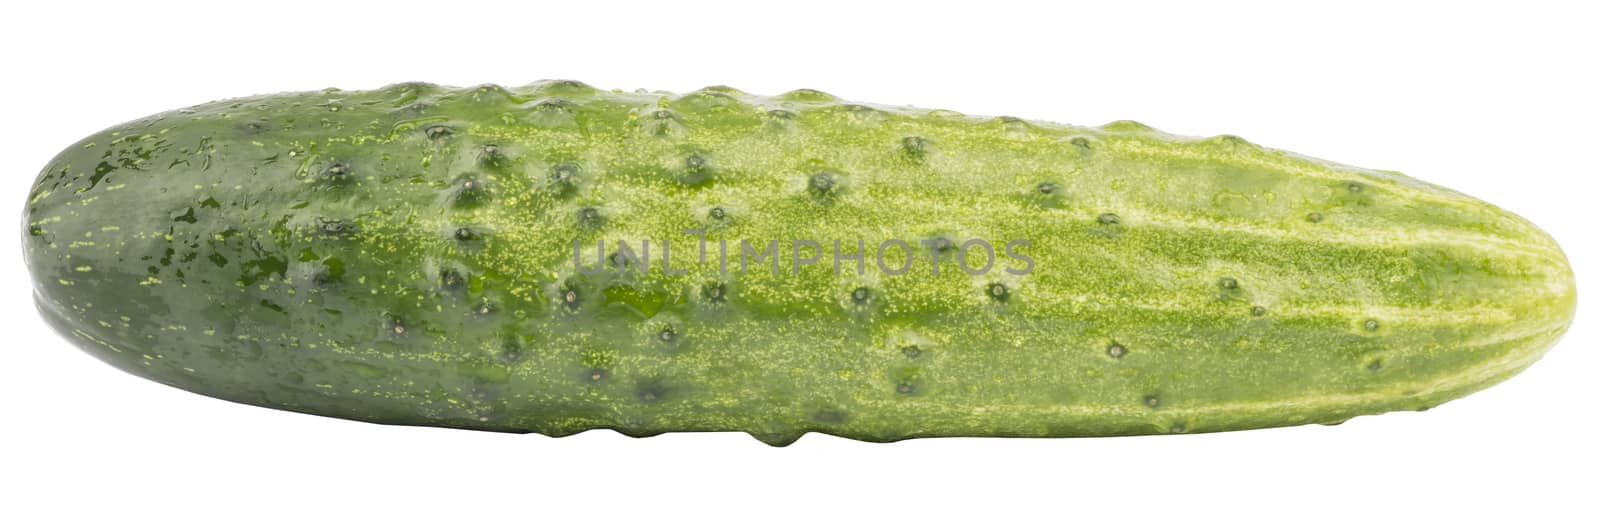 Fresh green cucumber on isolated white background